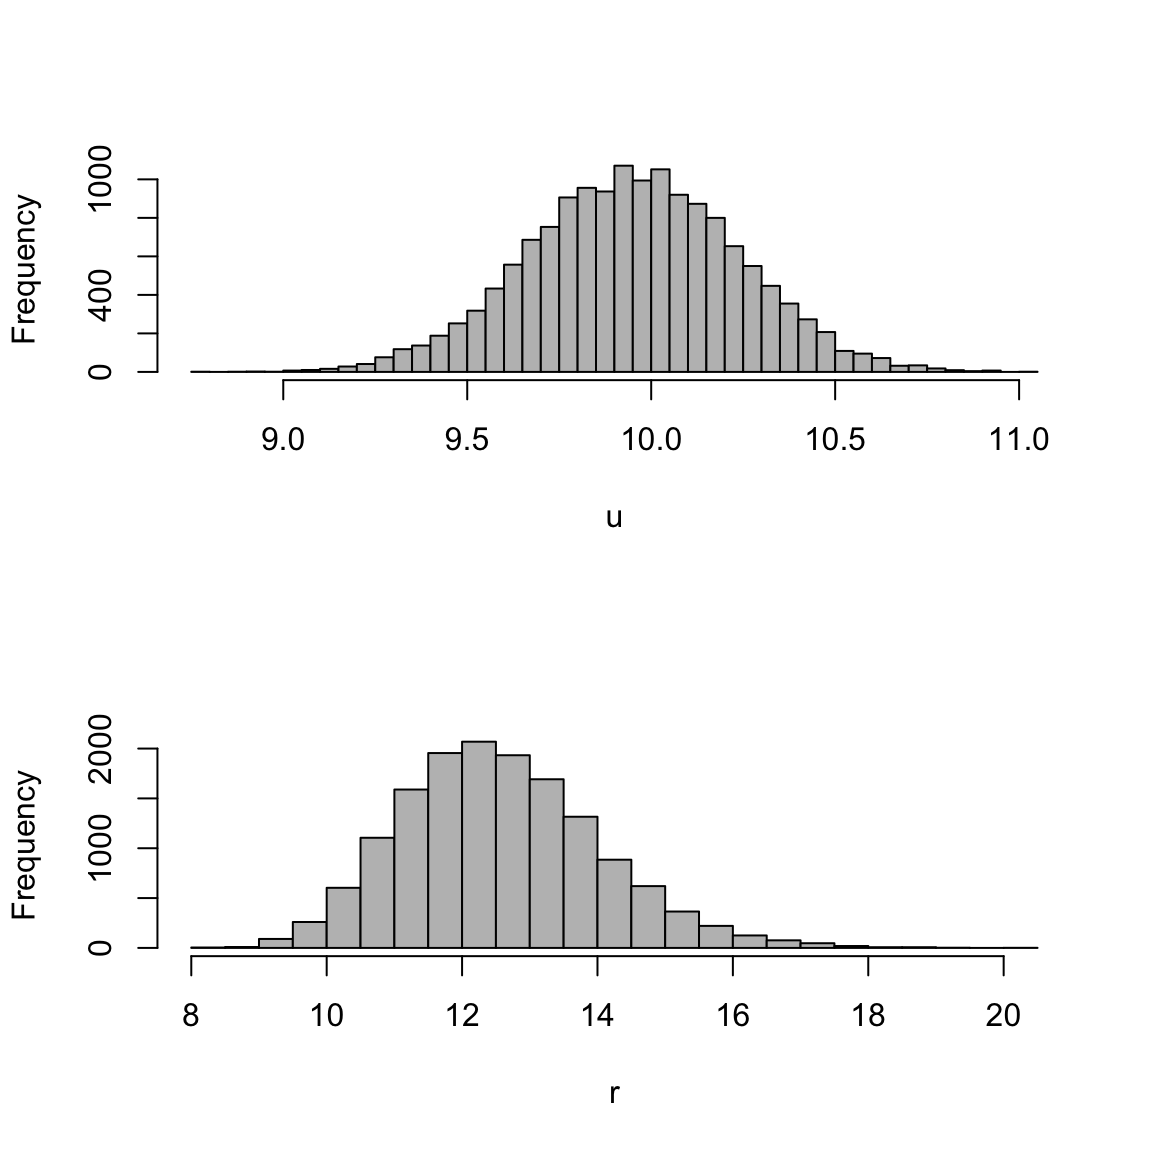 Plot of the posteriors for the linear regression model.